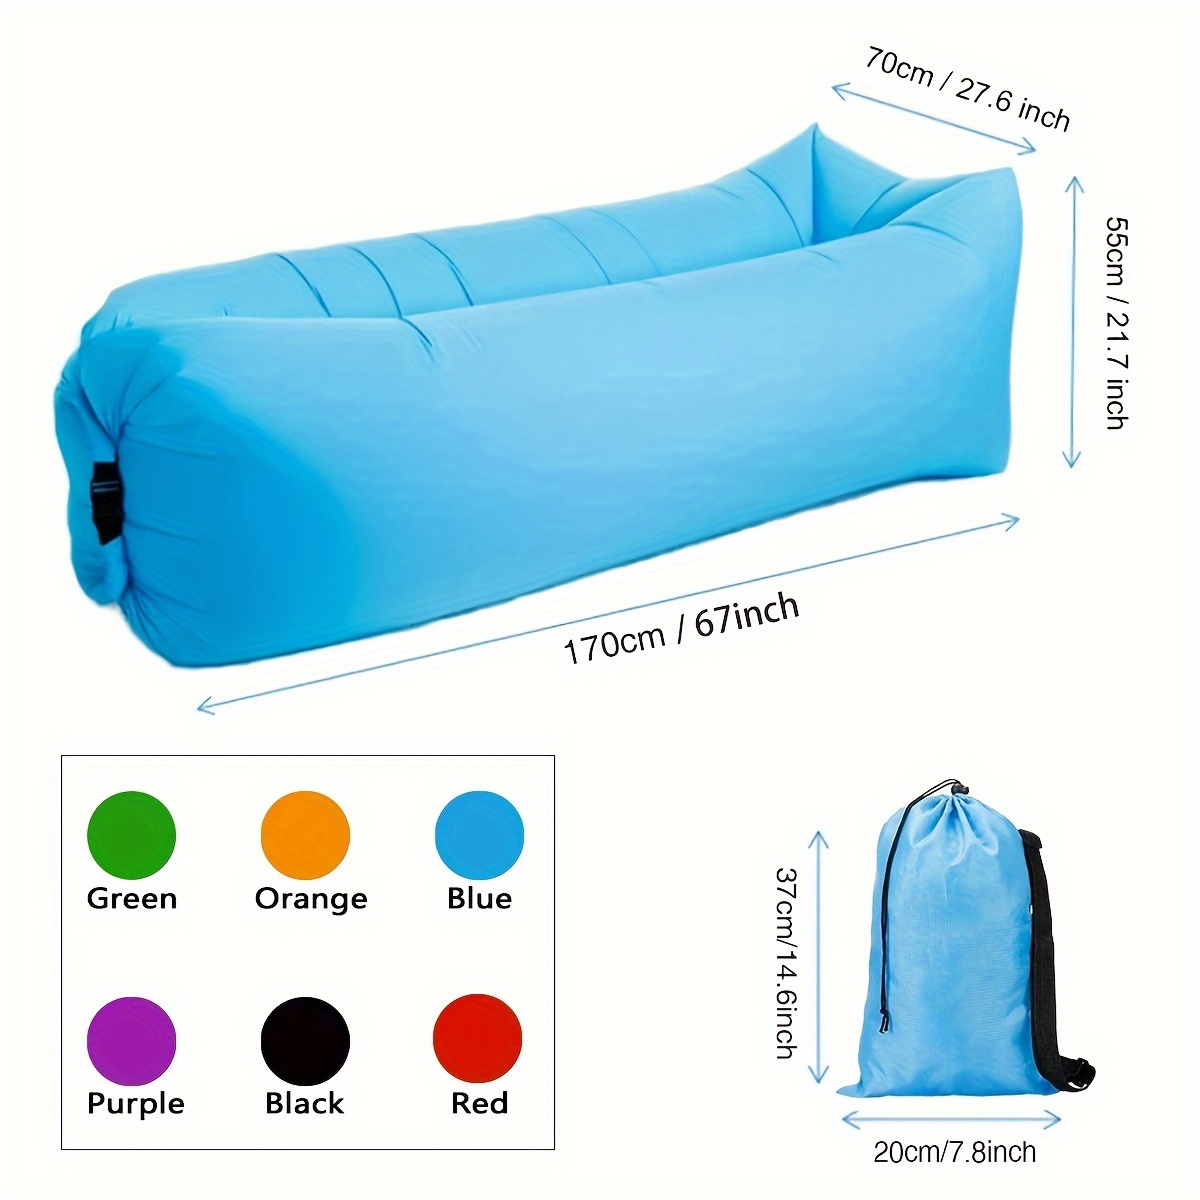  Auto-inflatable Lounger Air Mattress Portable Sofa Couch  Hammock Anti-Air Leaking Waterproof for Backyard Lakeside Beach Traveling  Camping Compression Sacks with Electric Pump,No-need Running : Sports &  Outdoors